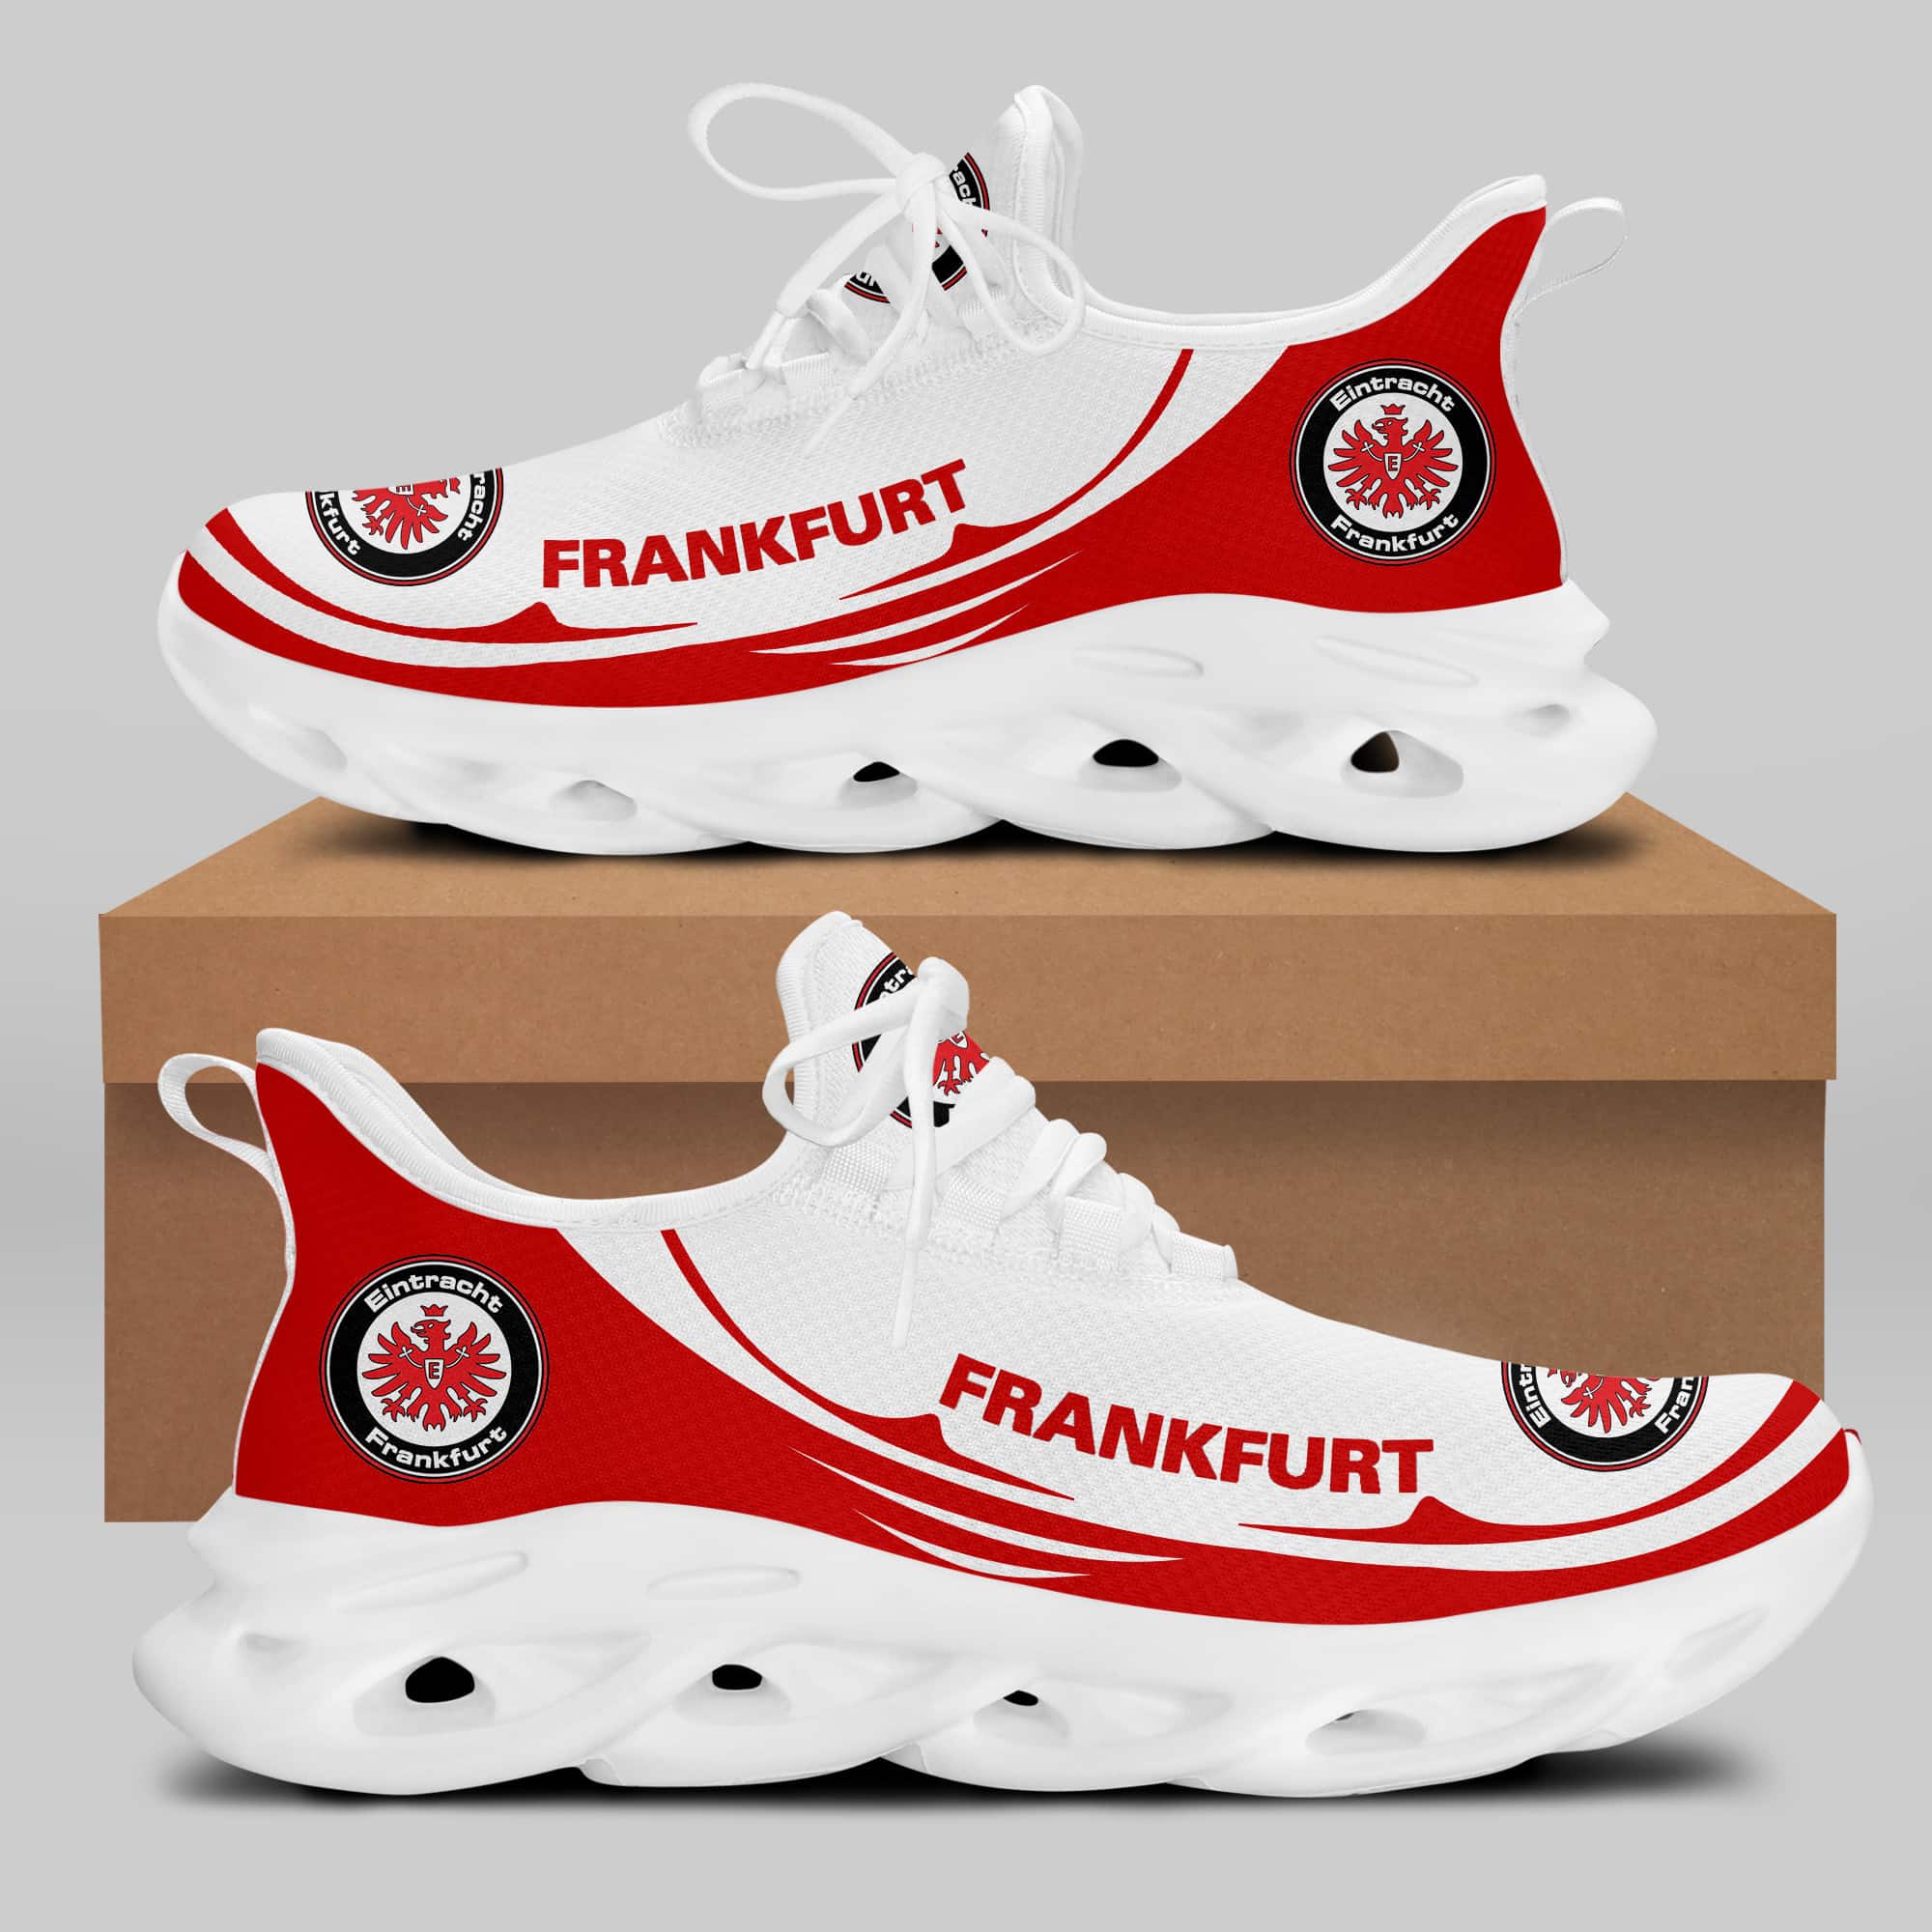 Eintracht Frankfurt Running Shoes Max Soul Shoes Sneakers Ver 19 1